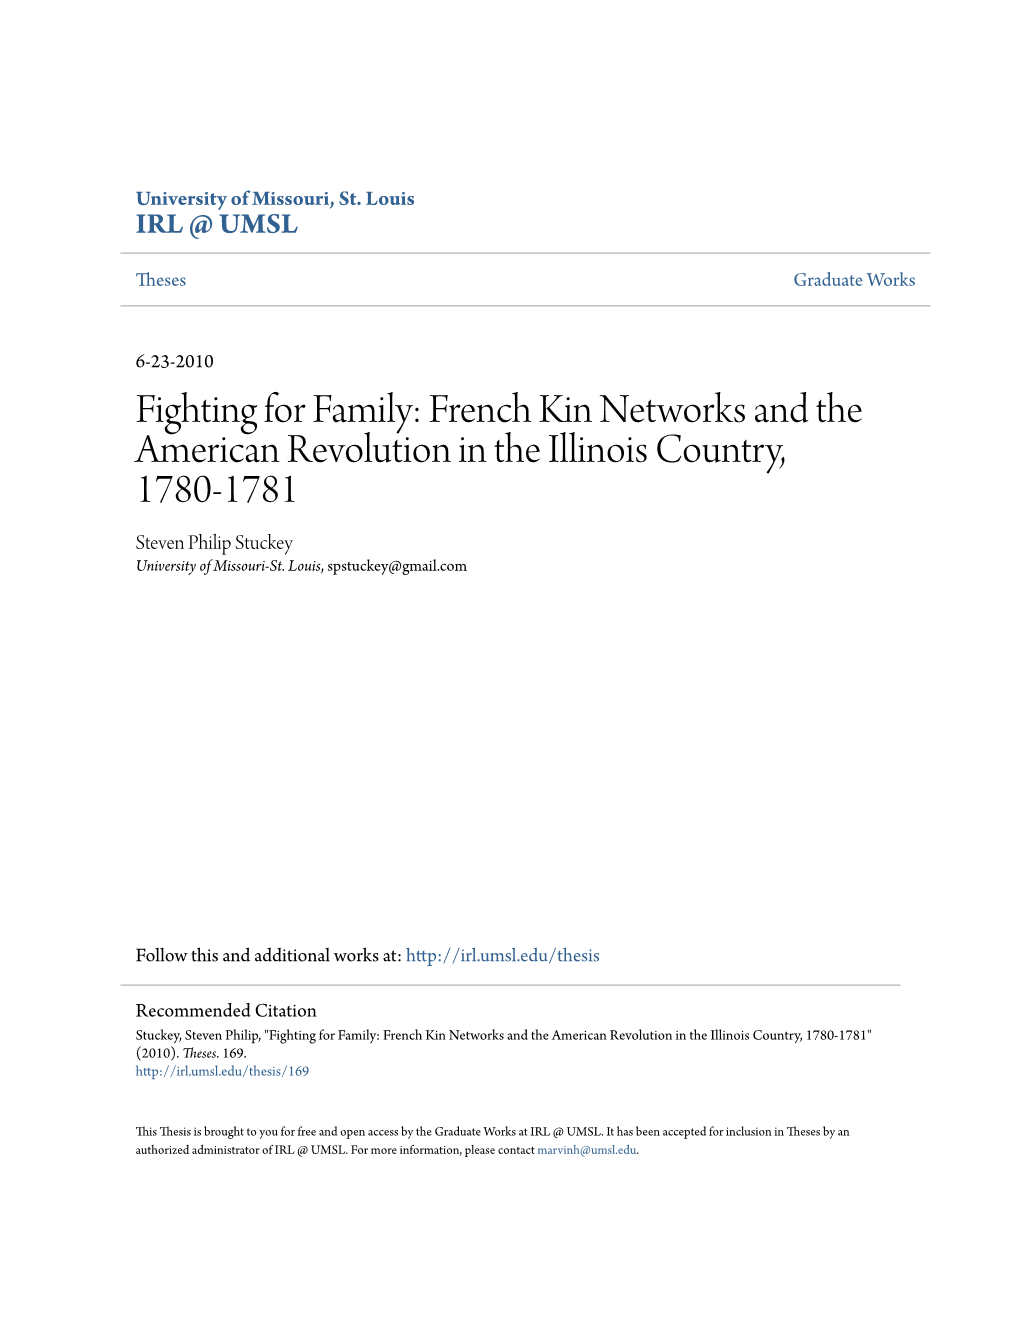 French Kin Networks and the American Revolution in the Illinois Country, 1780-1781 Steven Philip Stuckey University of Missouri-St